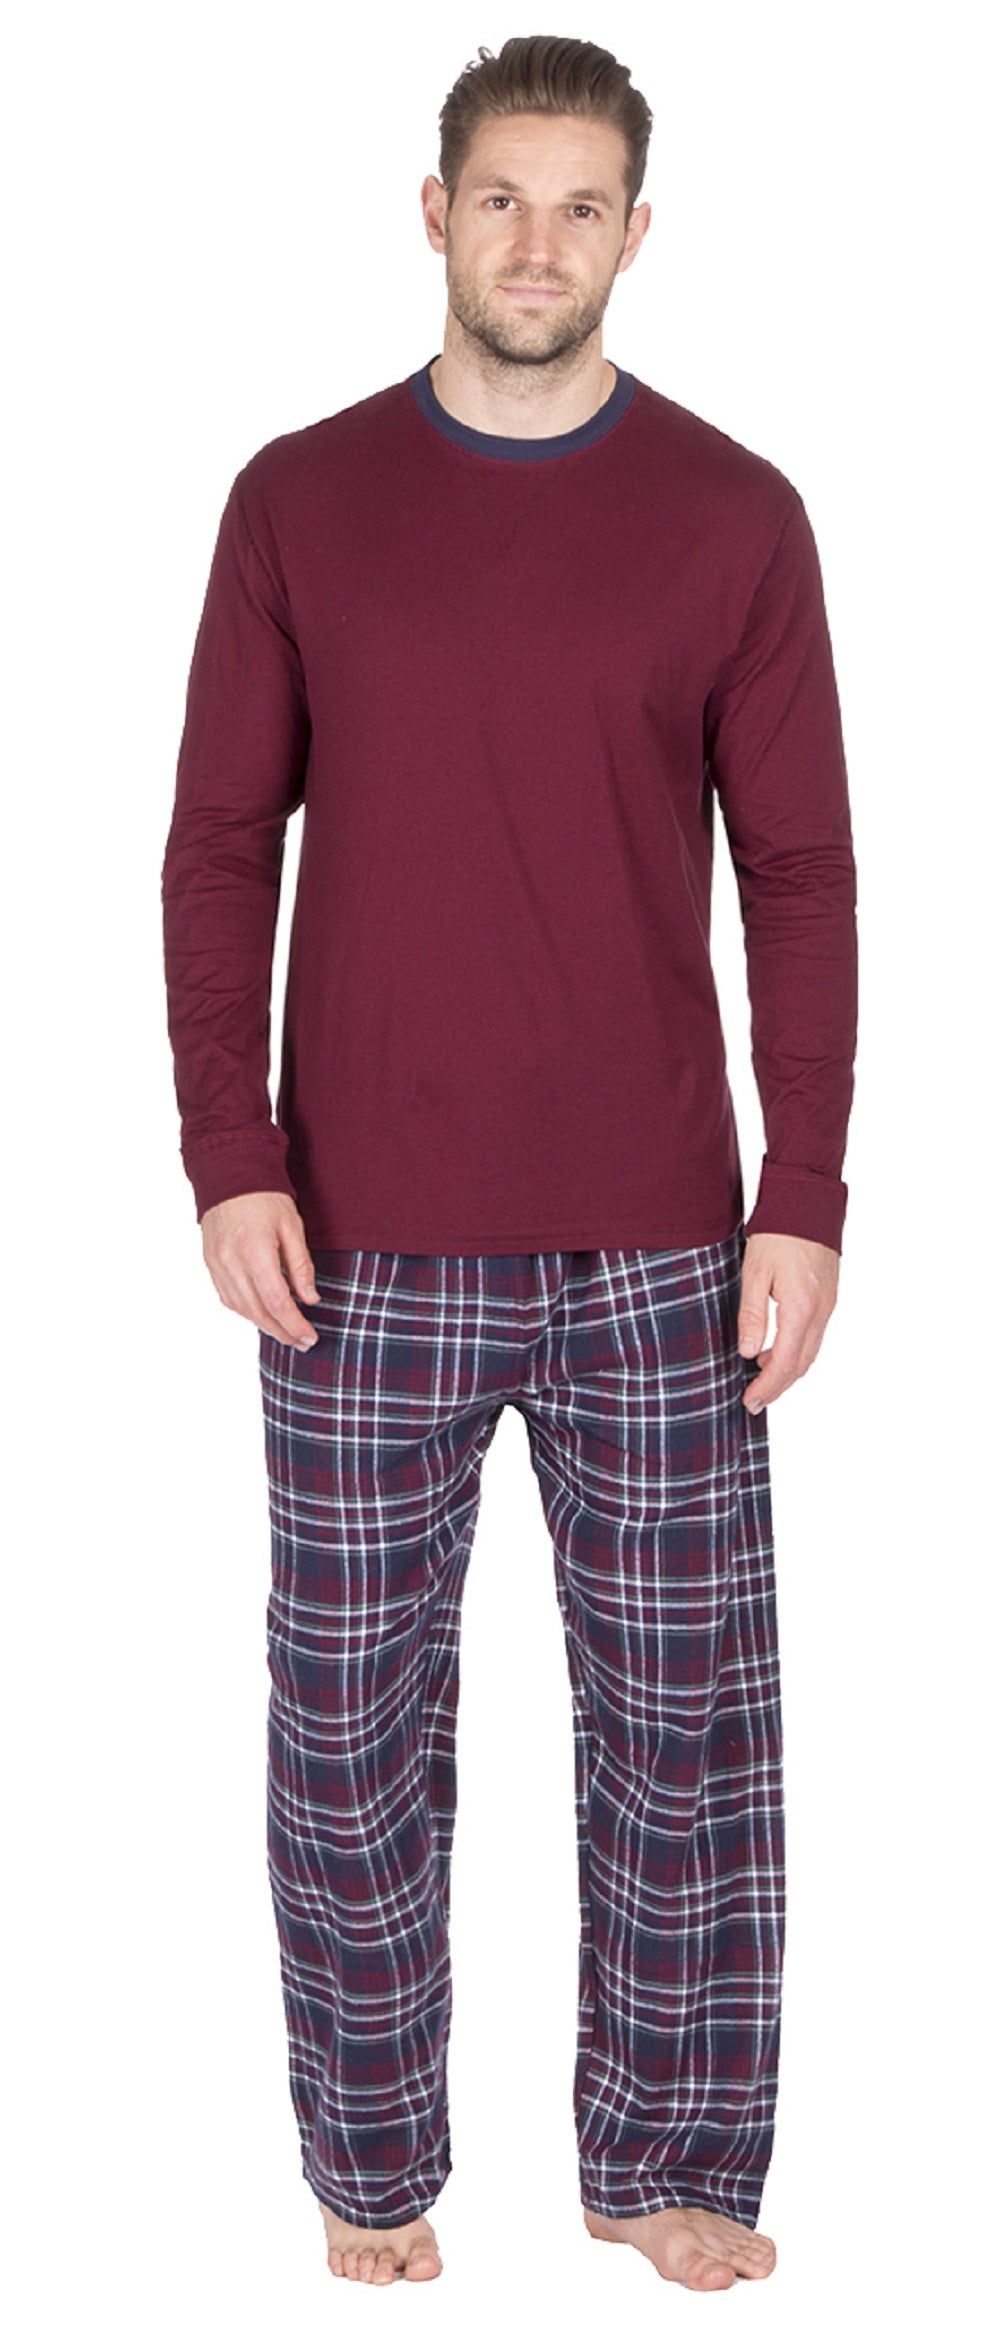 Octave Mens Long Sleeve Jersey Cotton Top Checked Flannel Pants Pyja British Thermals